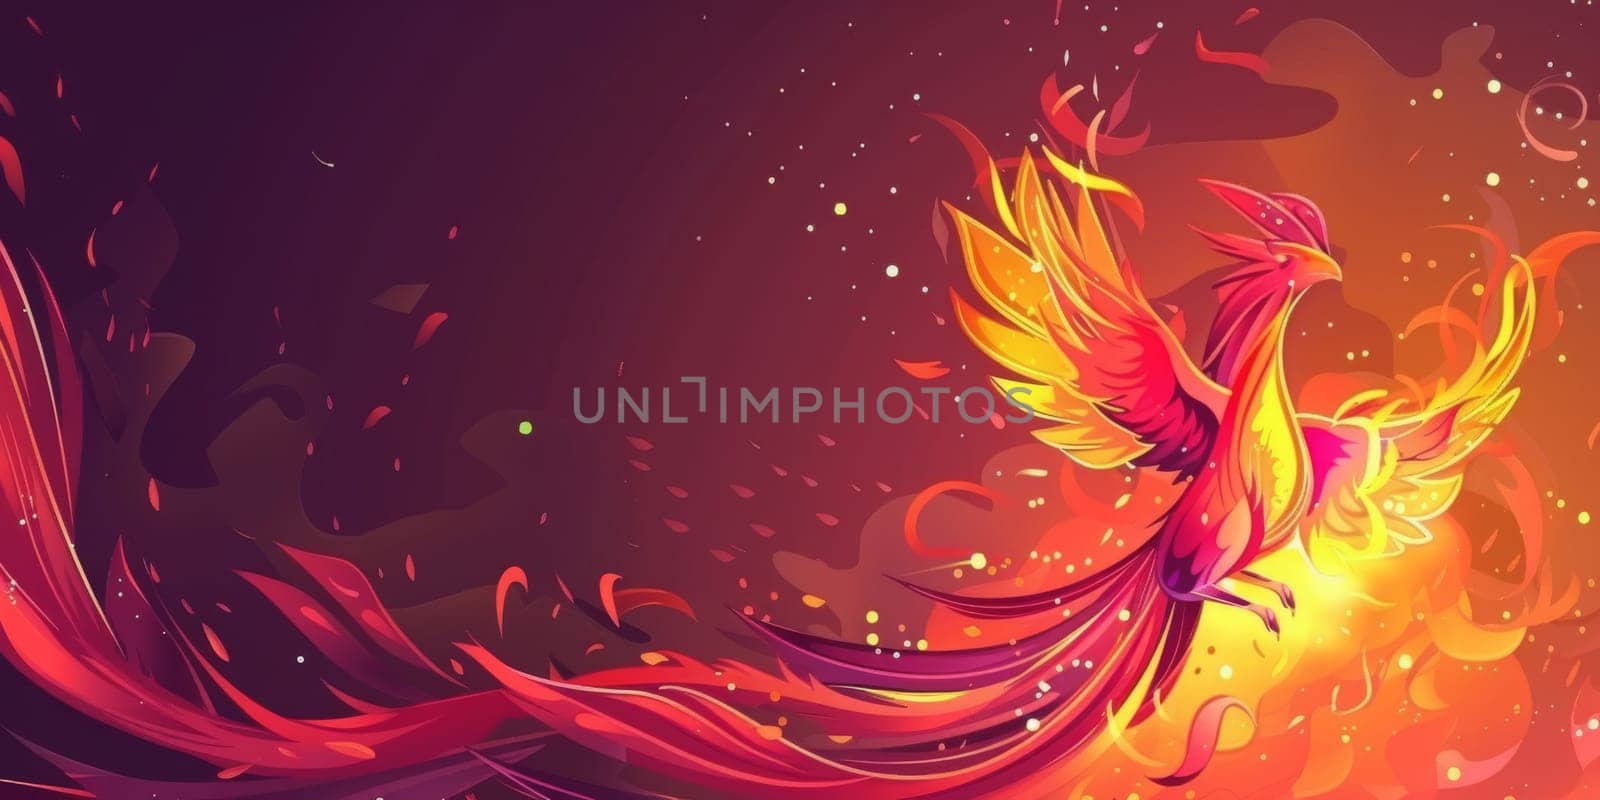 Fiery Fenix with abstract molten fire background with copy space